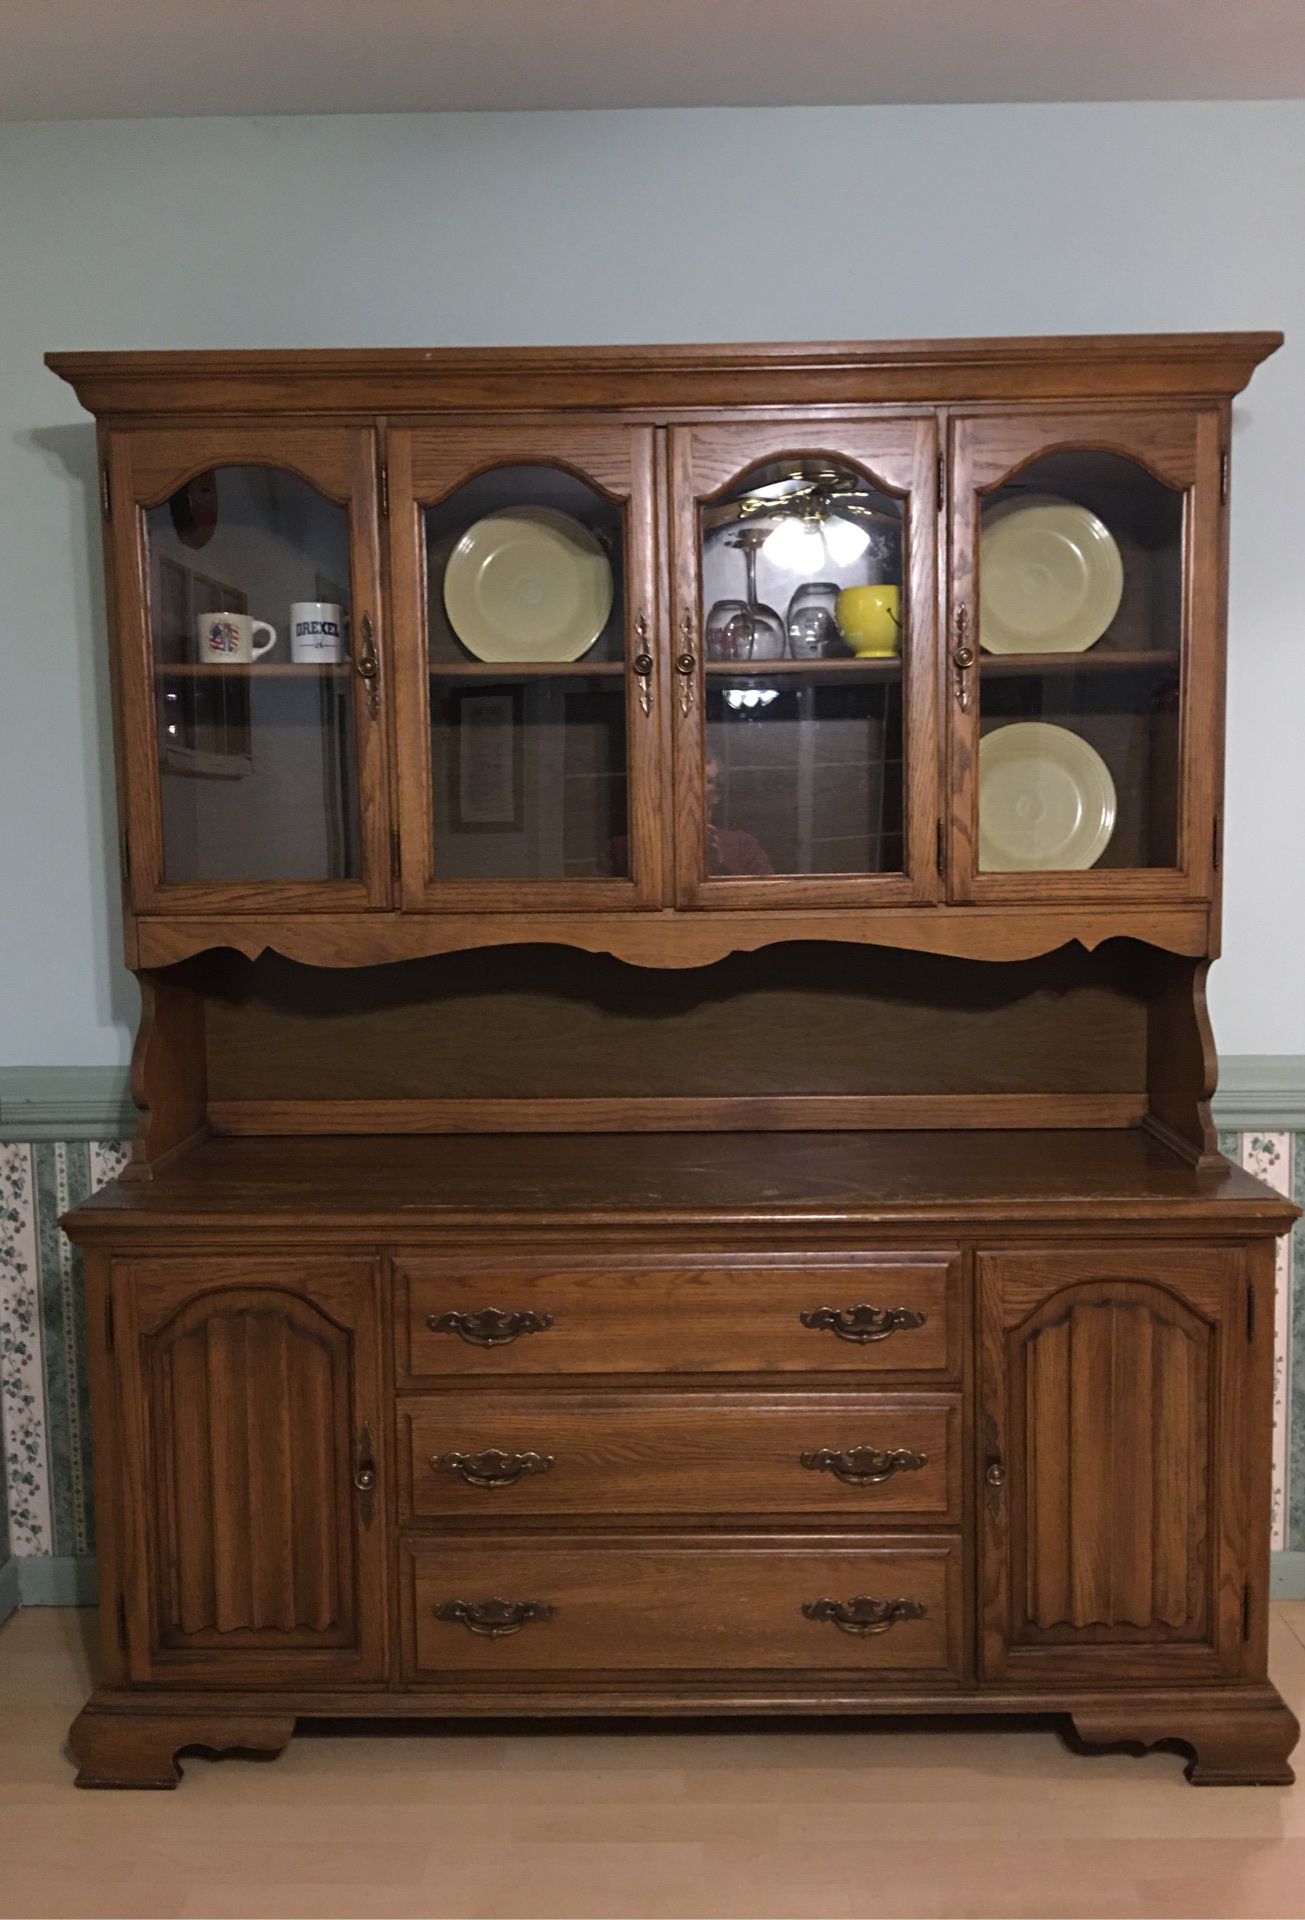 Wooden hutch with groves for plates and silverware rack